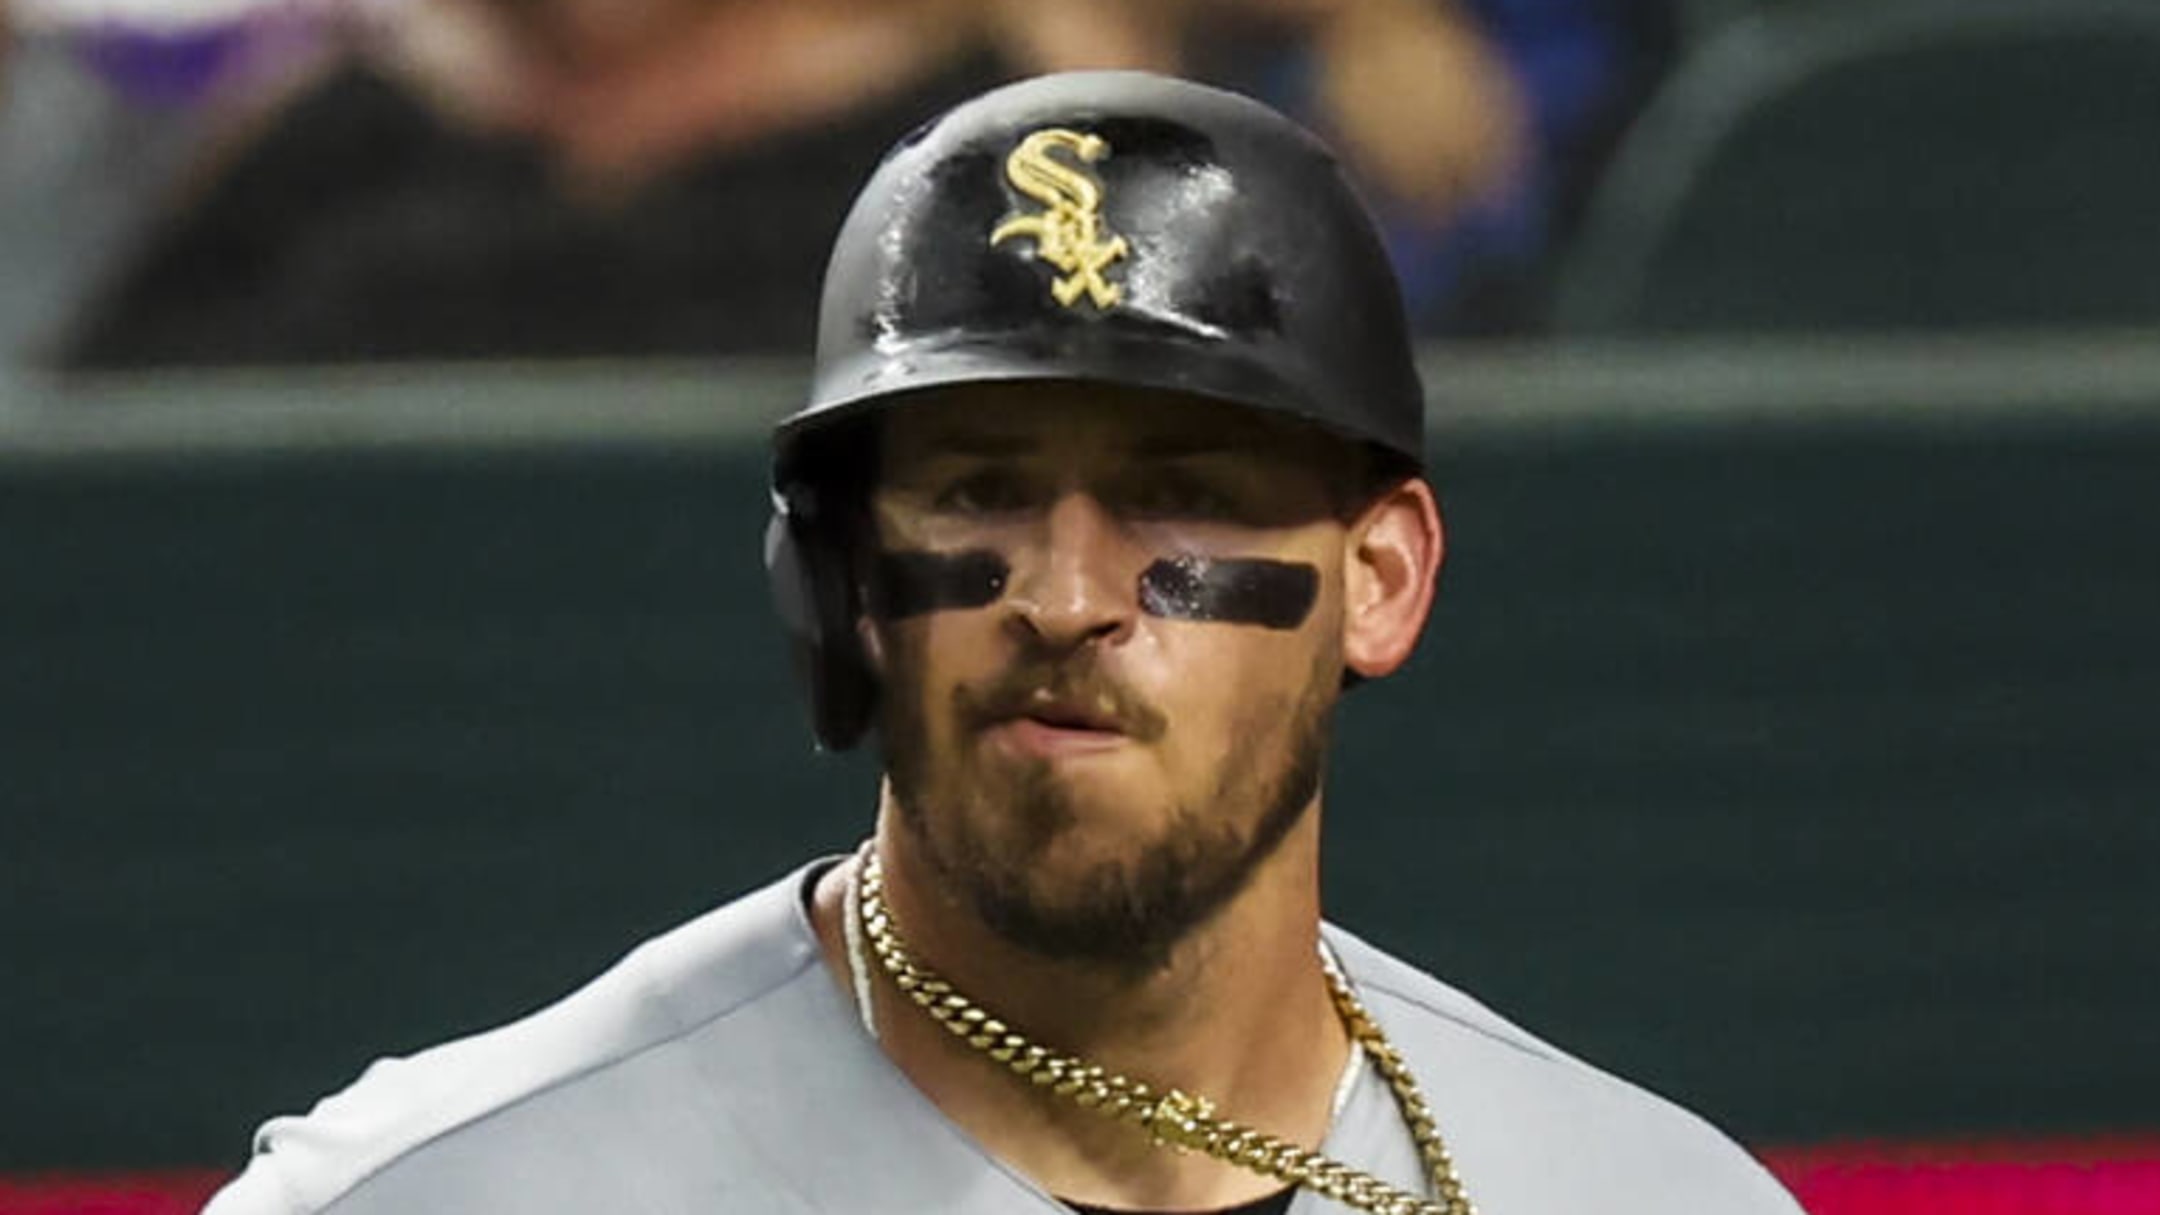 White Sox C Yasmani Grandal helped off field after apparent leg